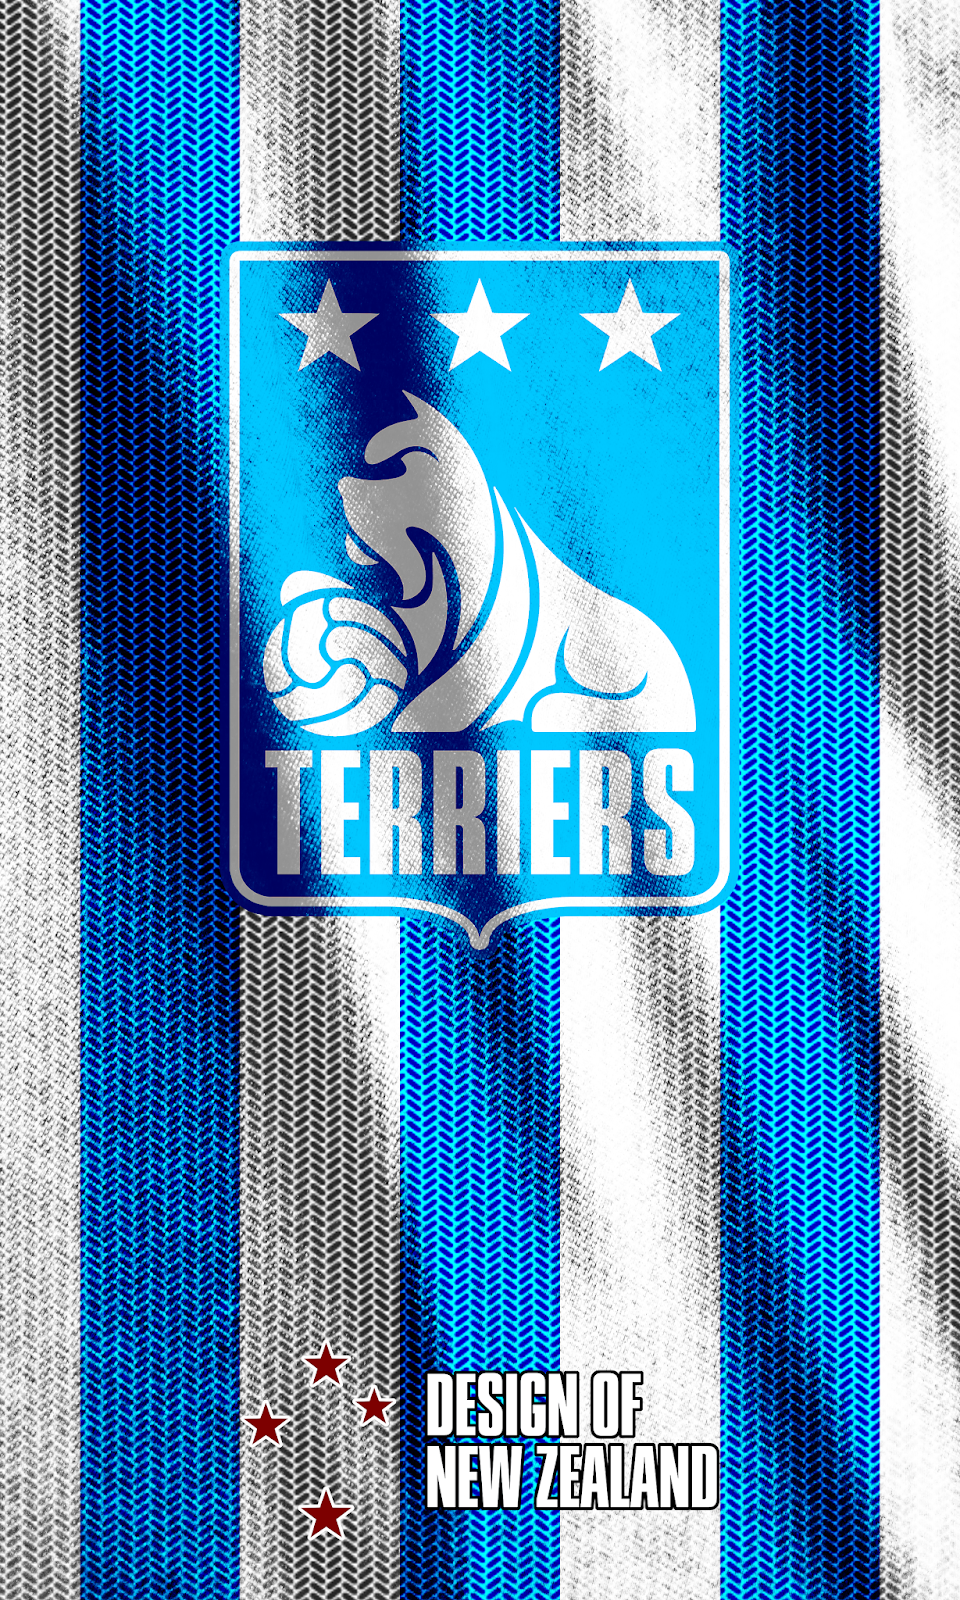 Wallpaper Huddersfield Town Afc The Football Illustrated Inc